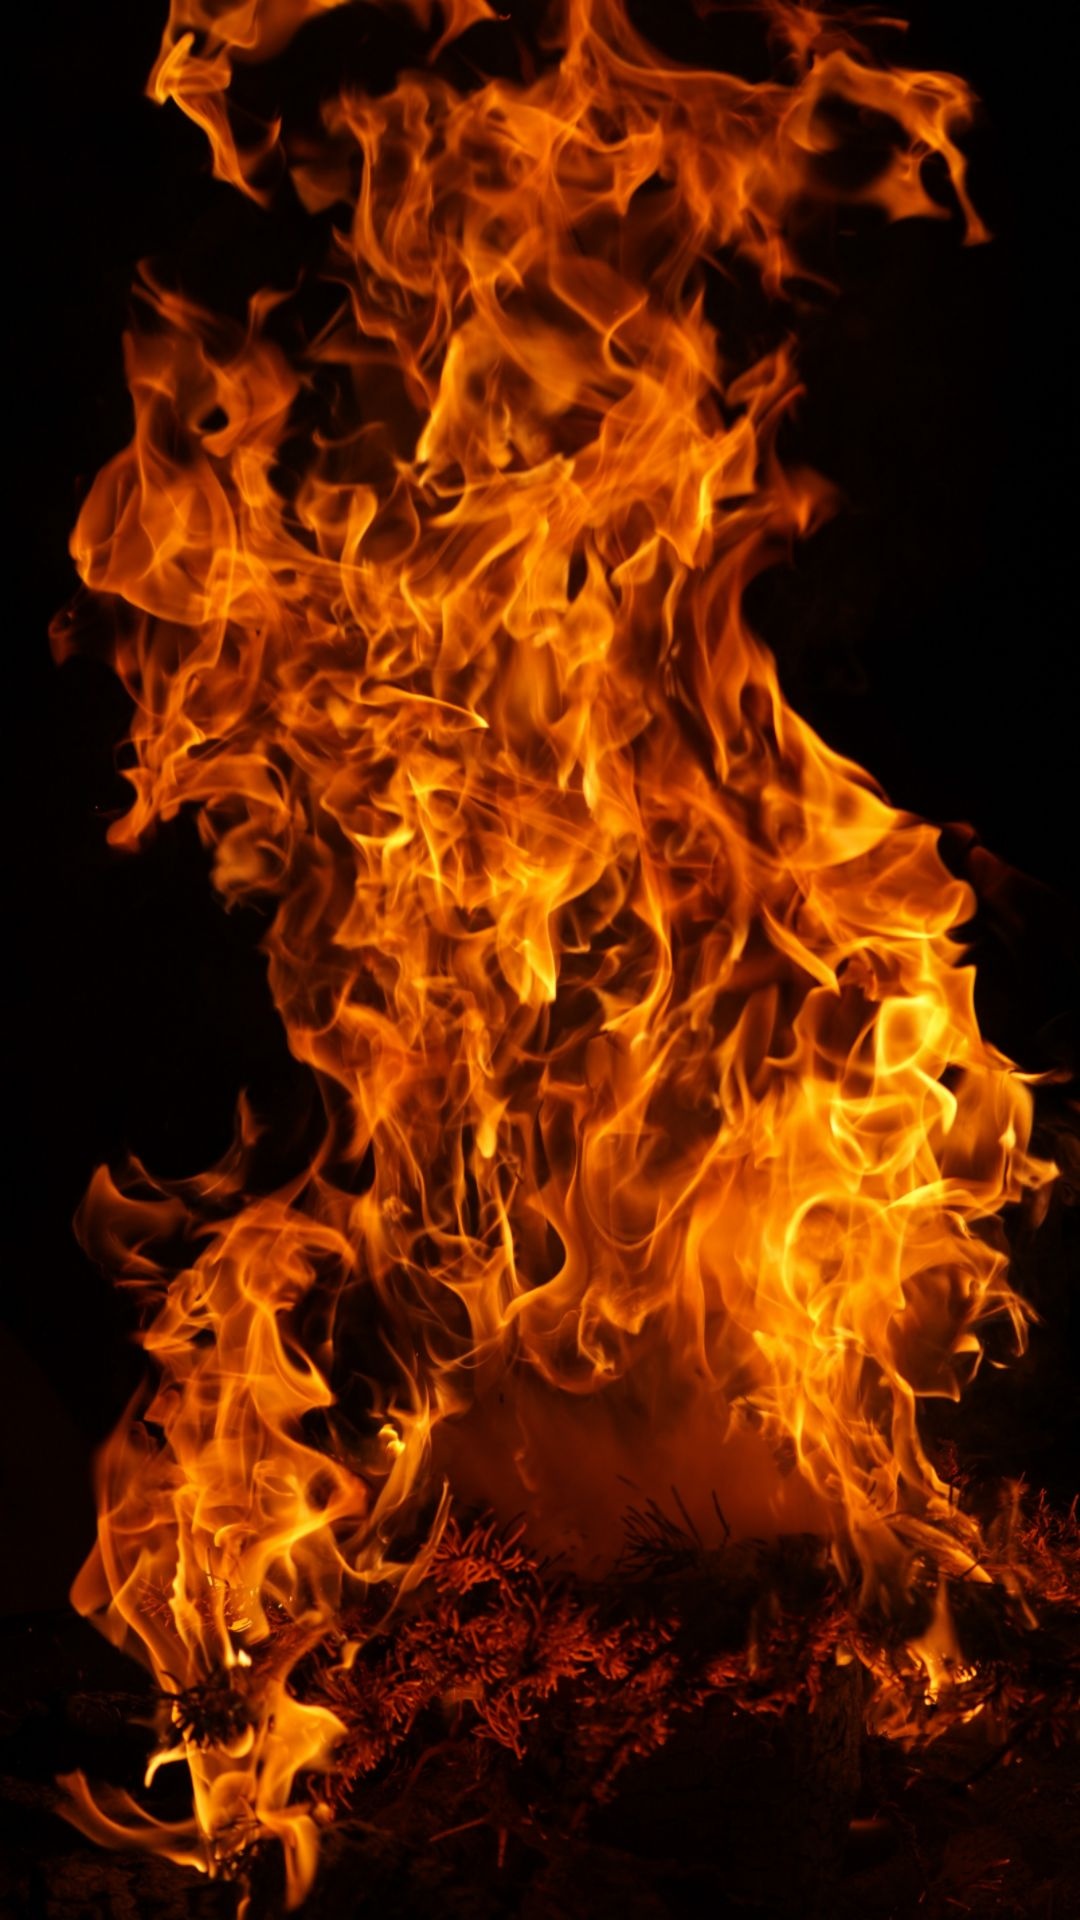 Top best quality fire wallpapers, Captivating visuals, Mesmerizing flames, Dynamic energy, Fiery backdrop, 1080x1920 Full HD Handy